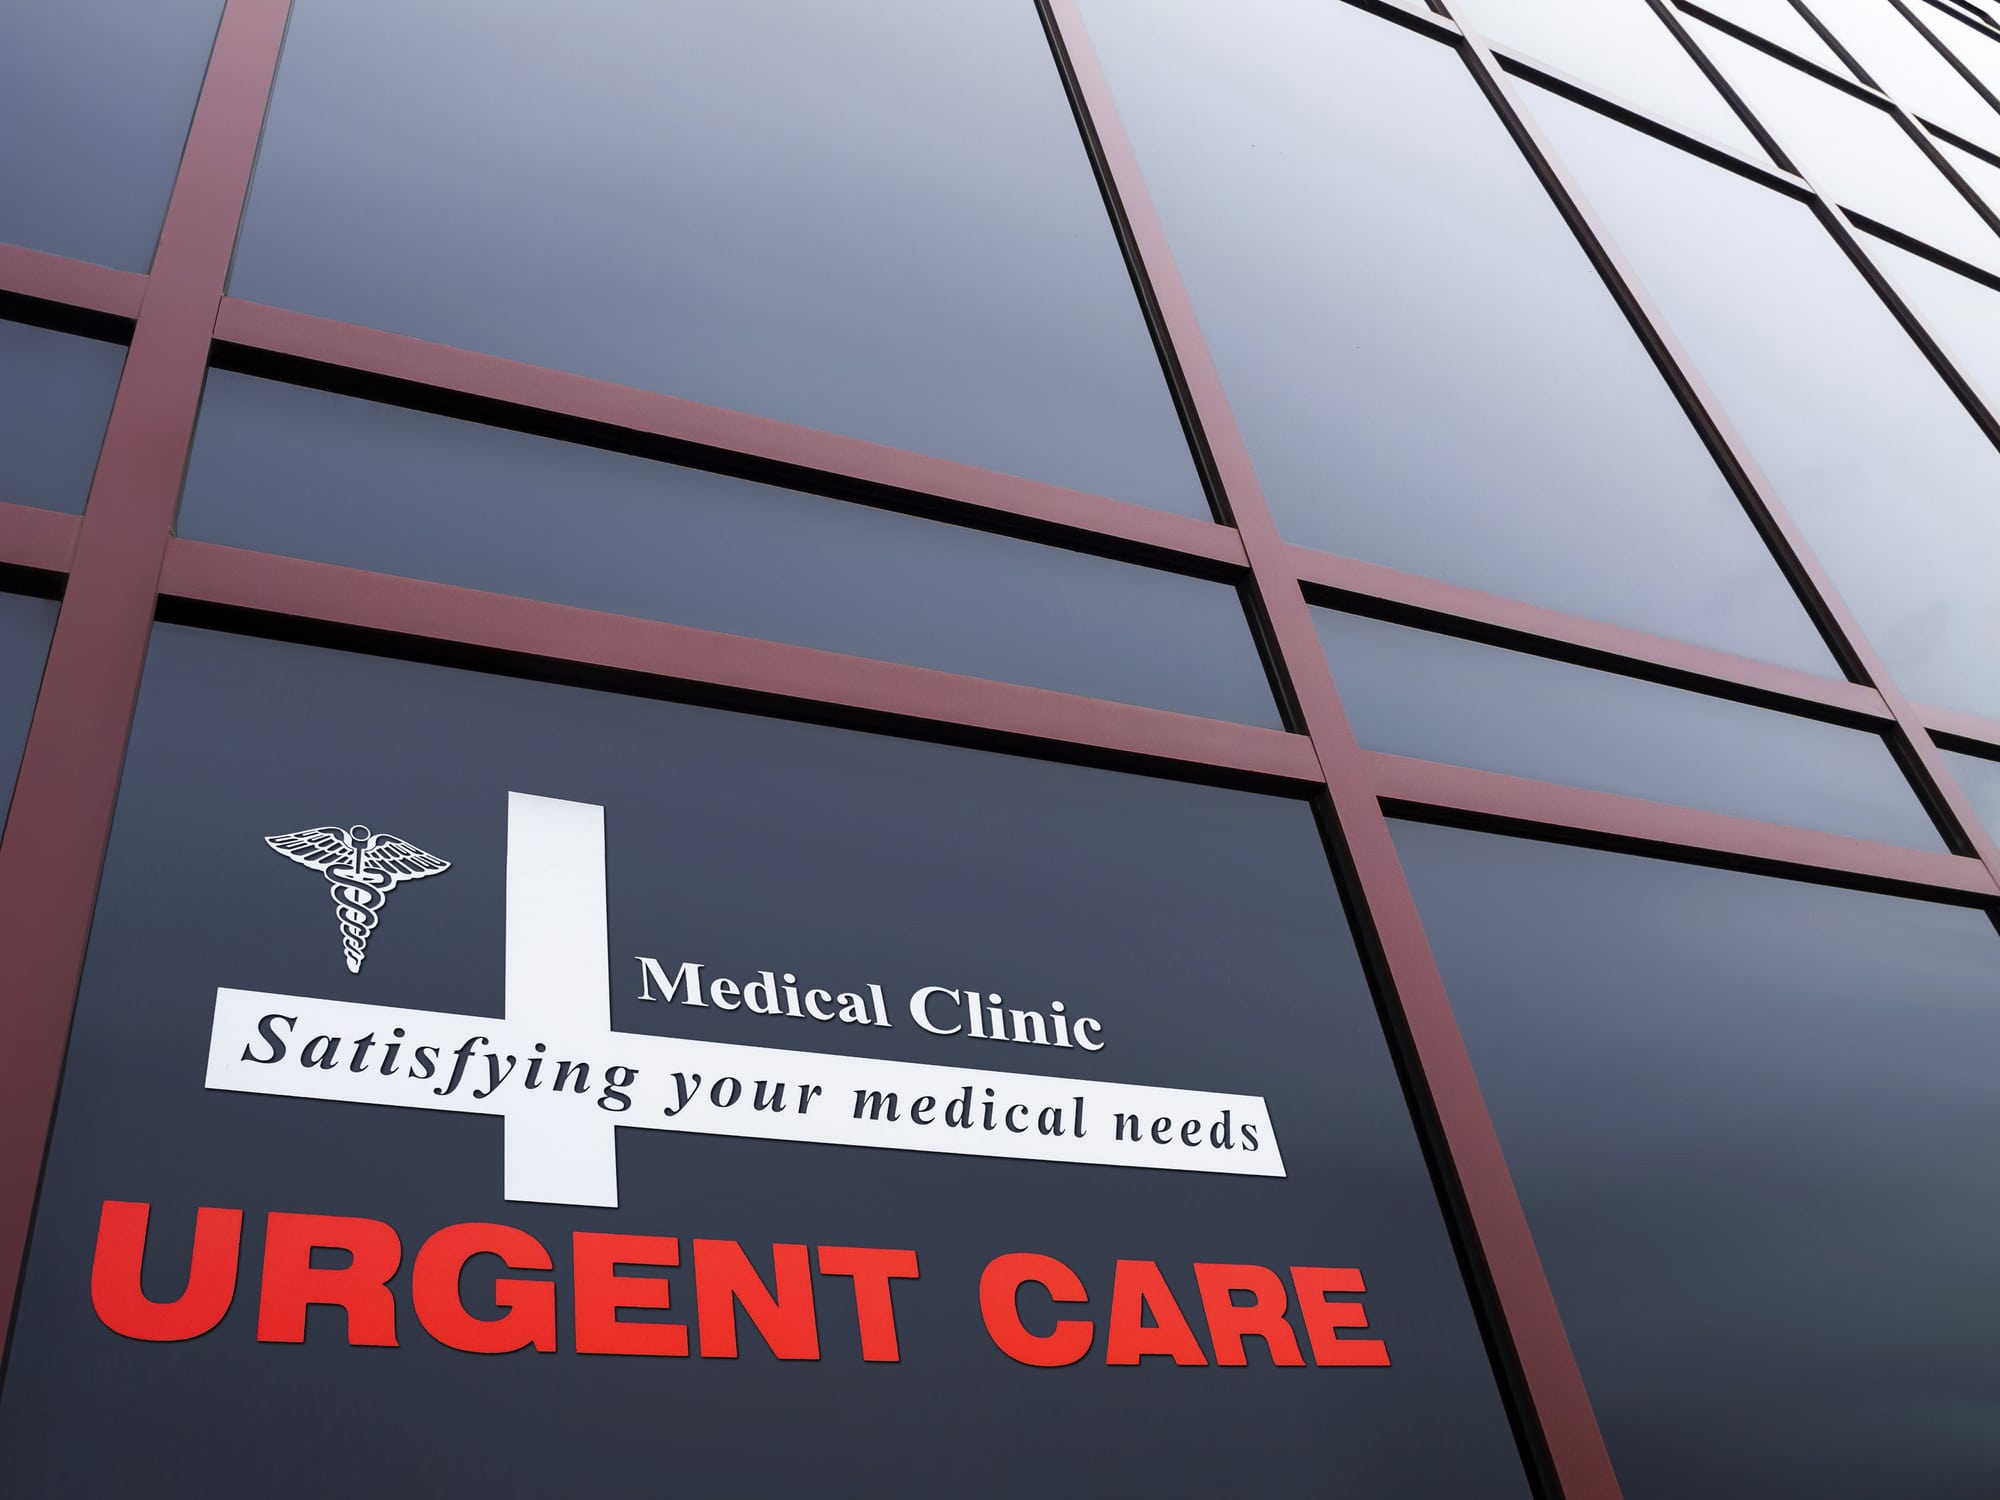 Urgent Care Medical Clinic window sign